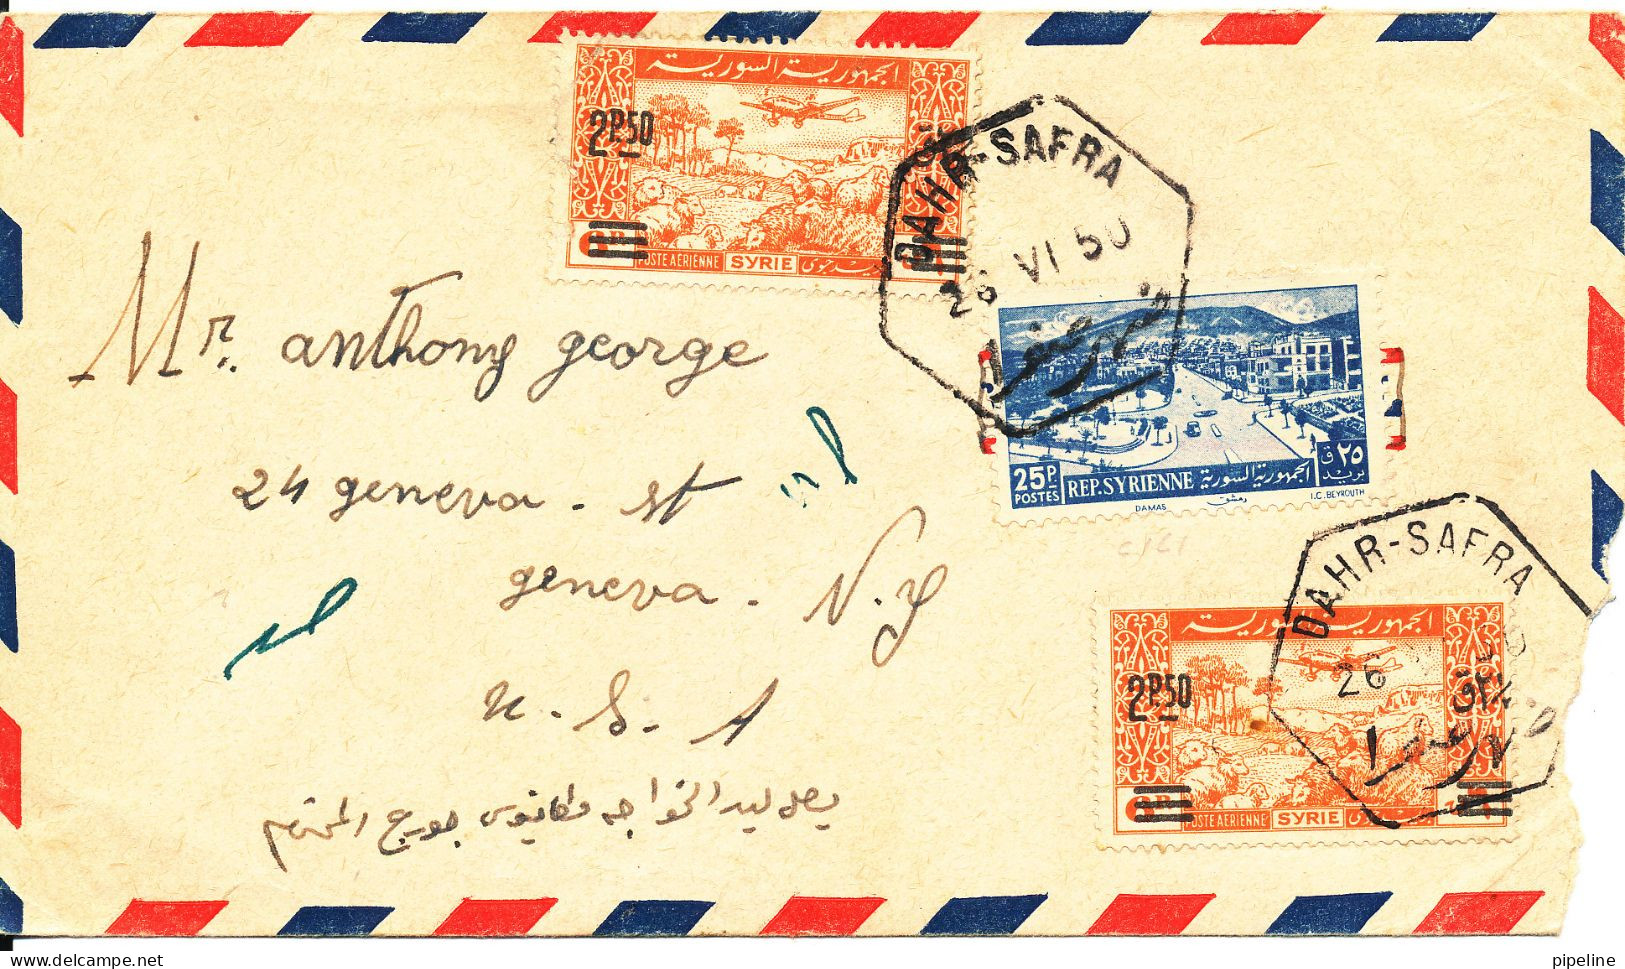 Syria Air Mail Cover Sent To USA Dahr Safra 26-6-1950 Overprinted Stamps The Cover Is Damaged In The Right Side - Syrien